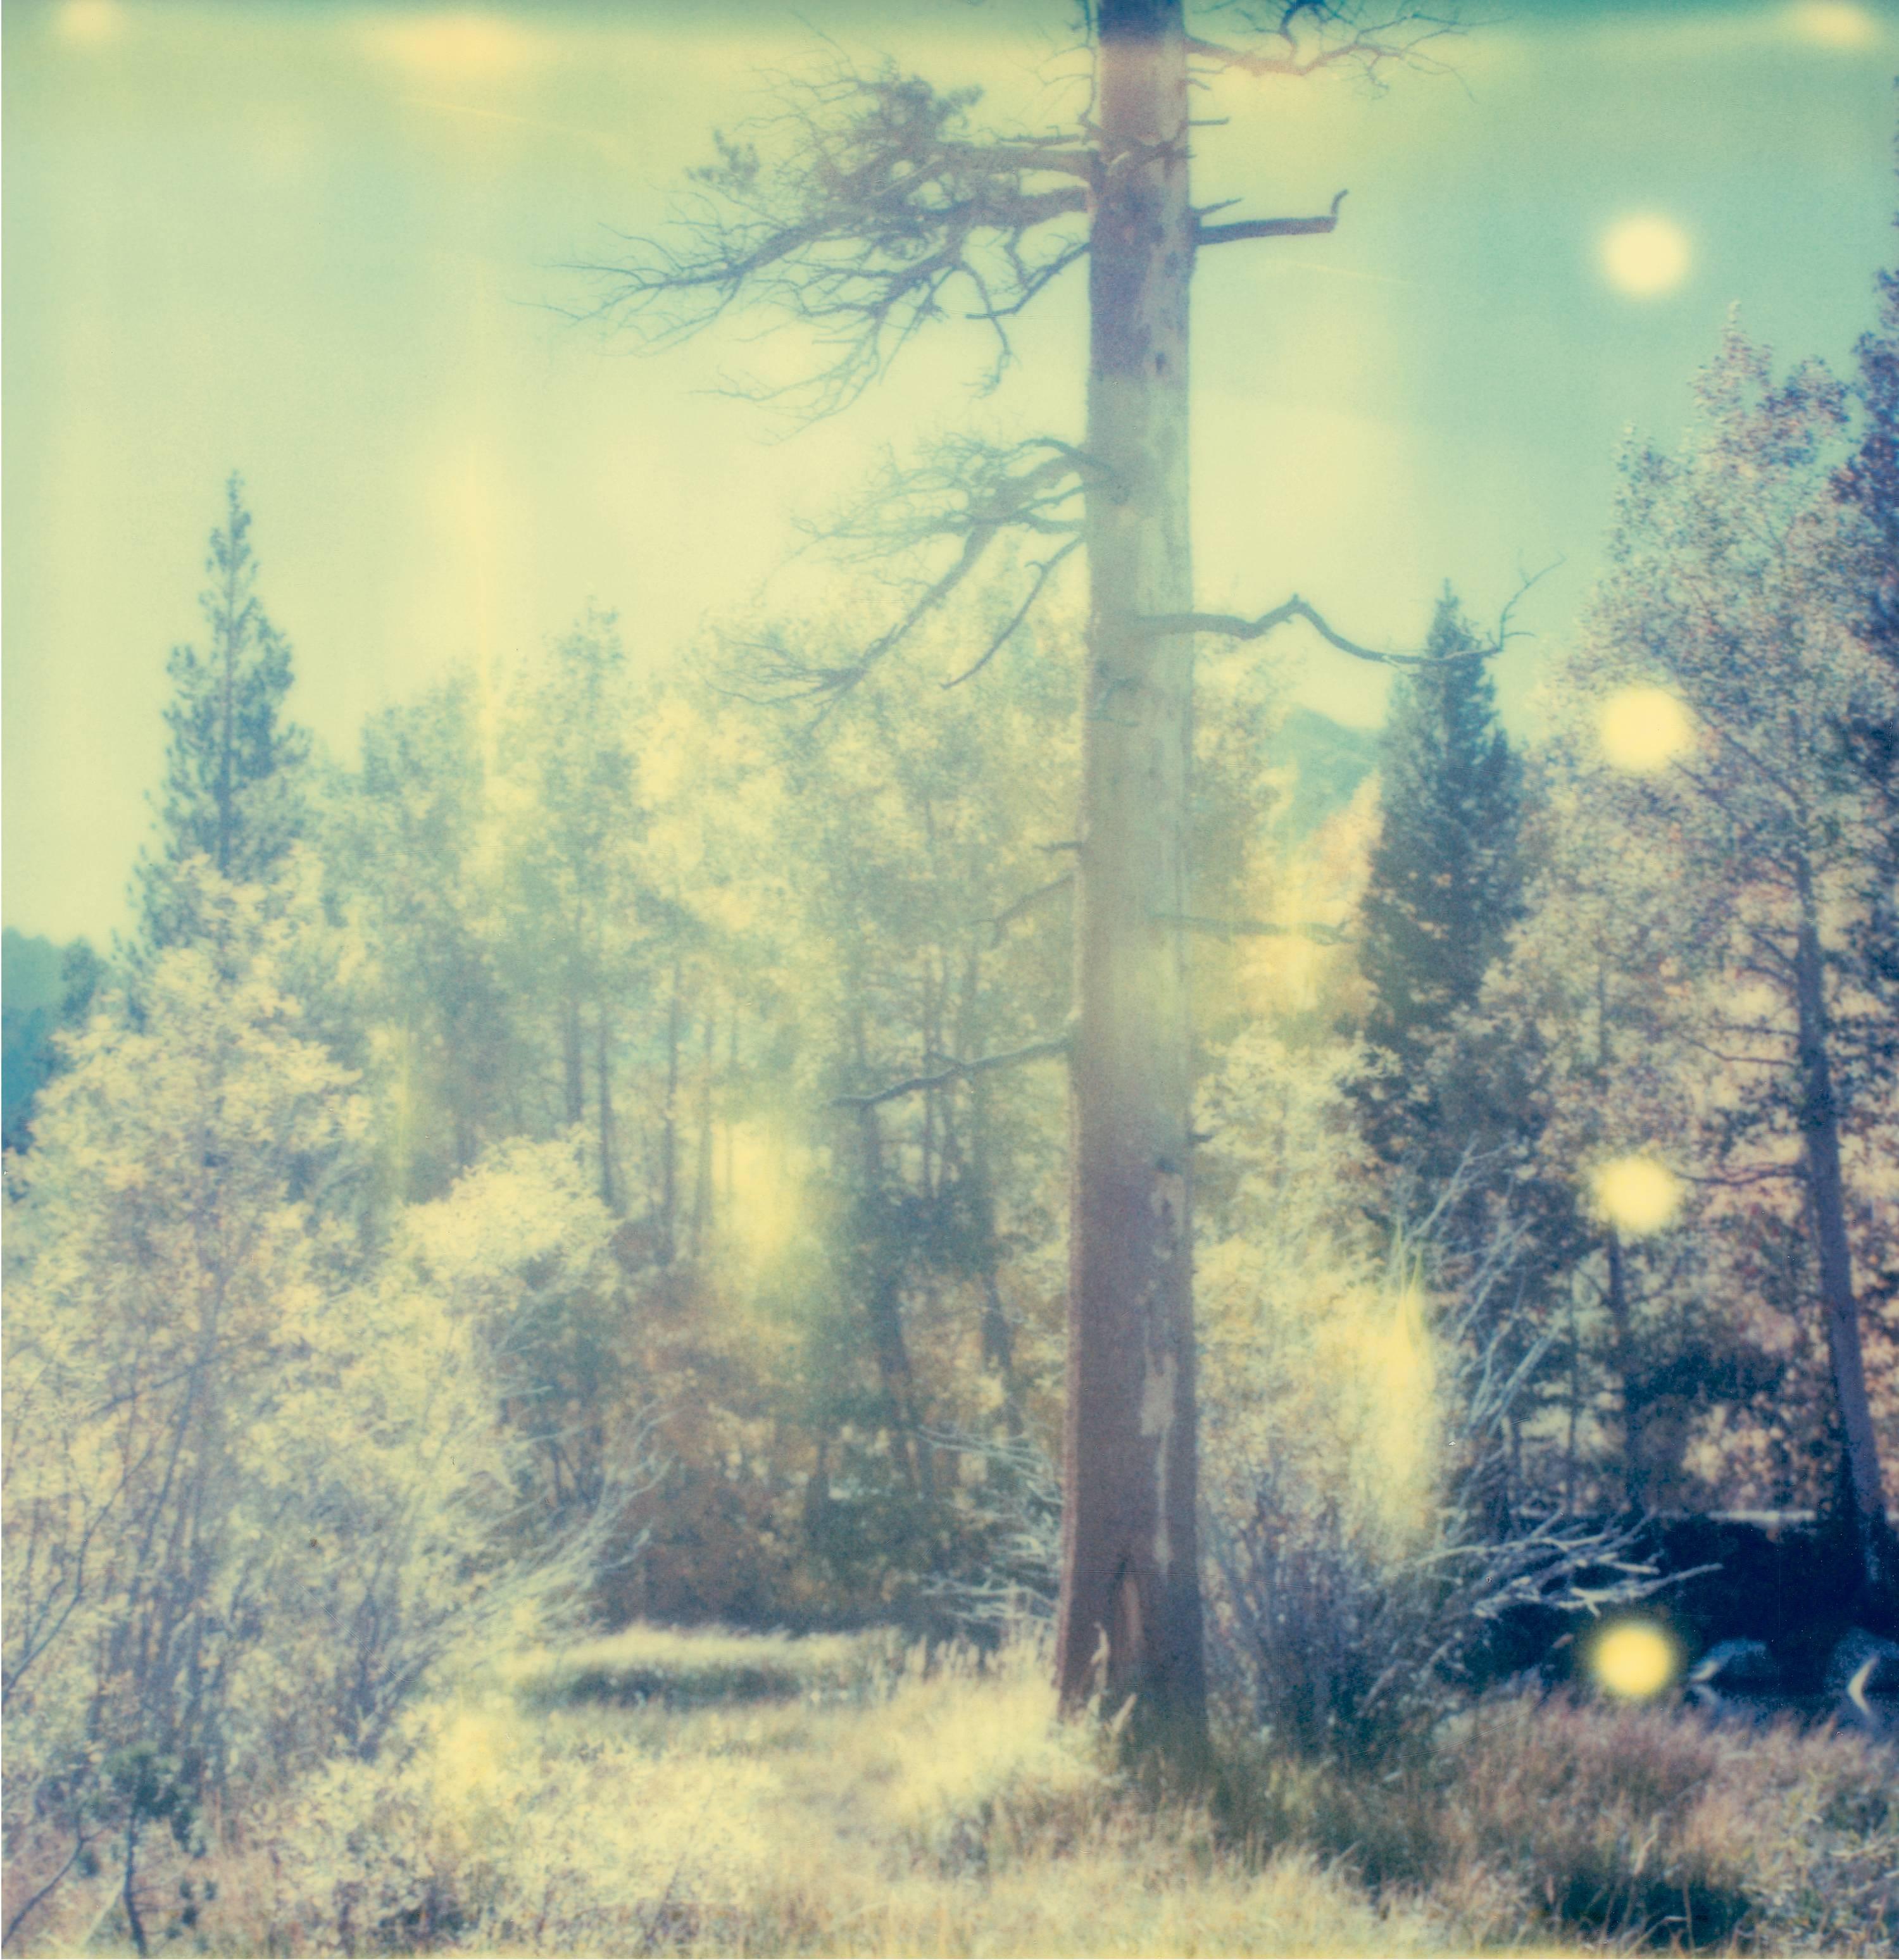 In the Range of Light III (Wastelands) - analog, Contemporary, Polaroid, Color 1